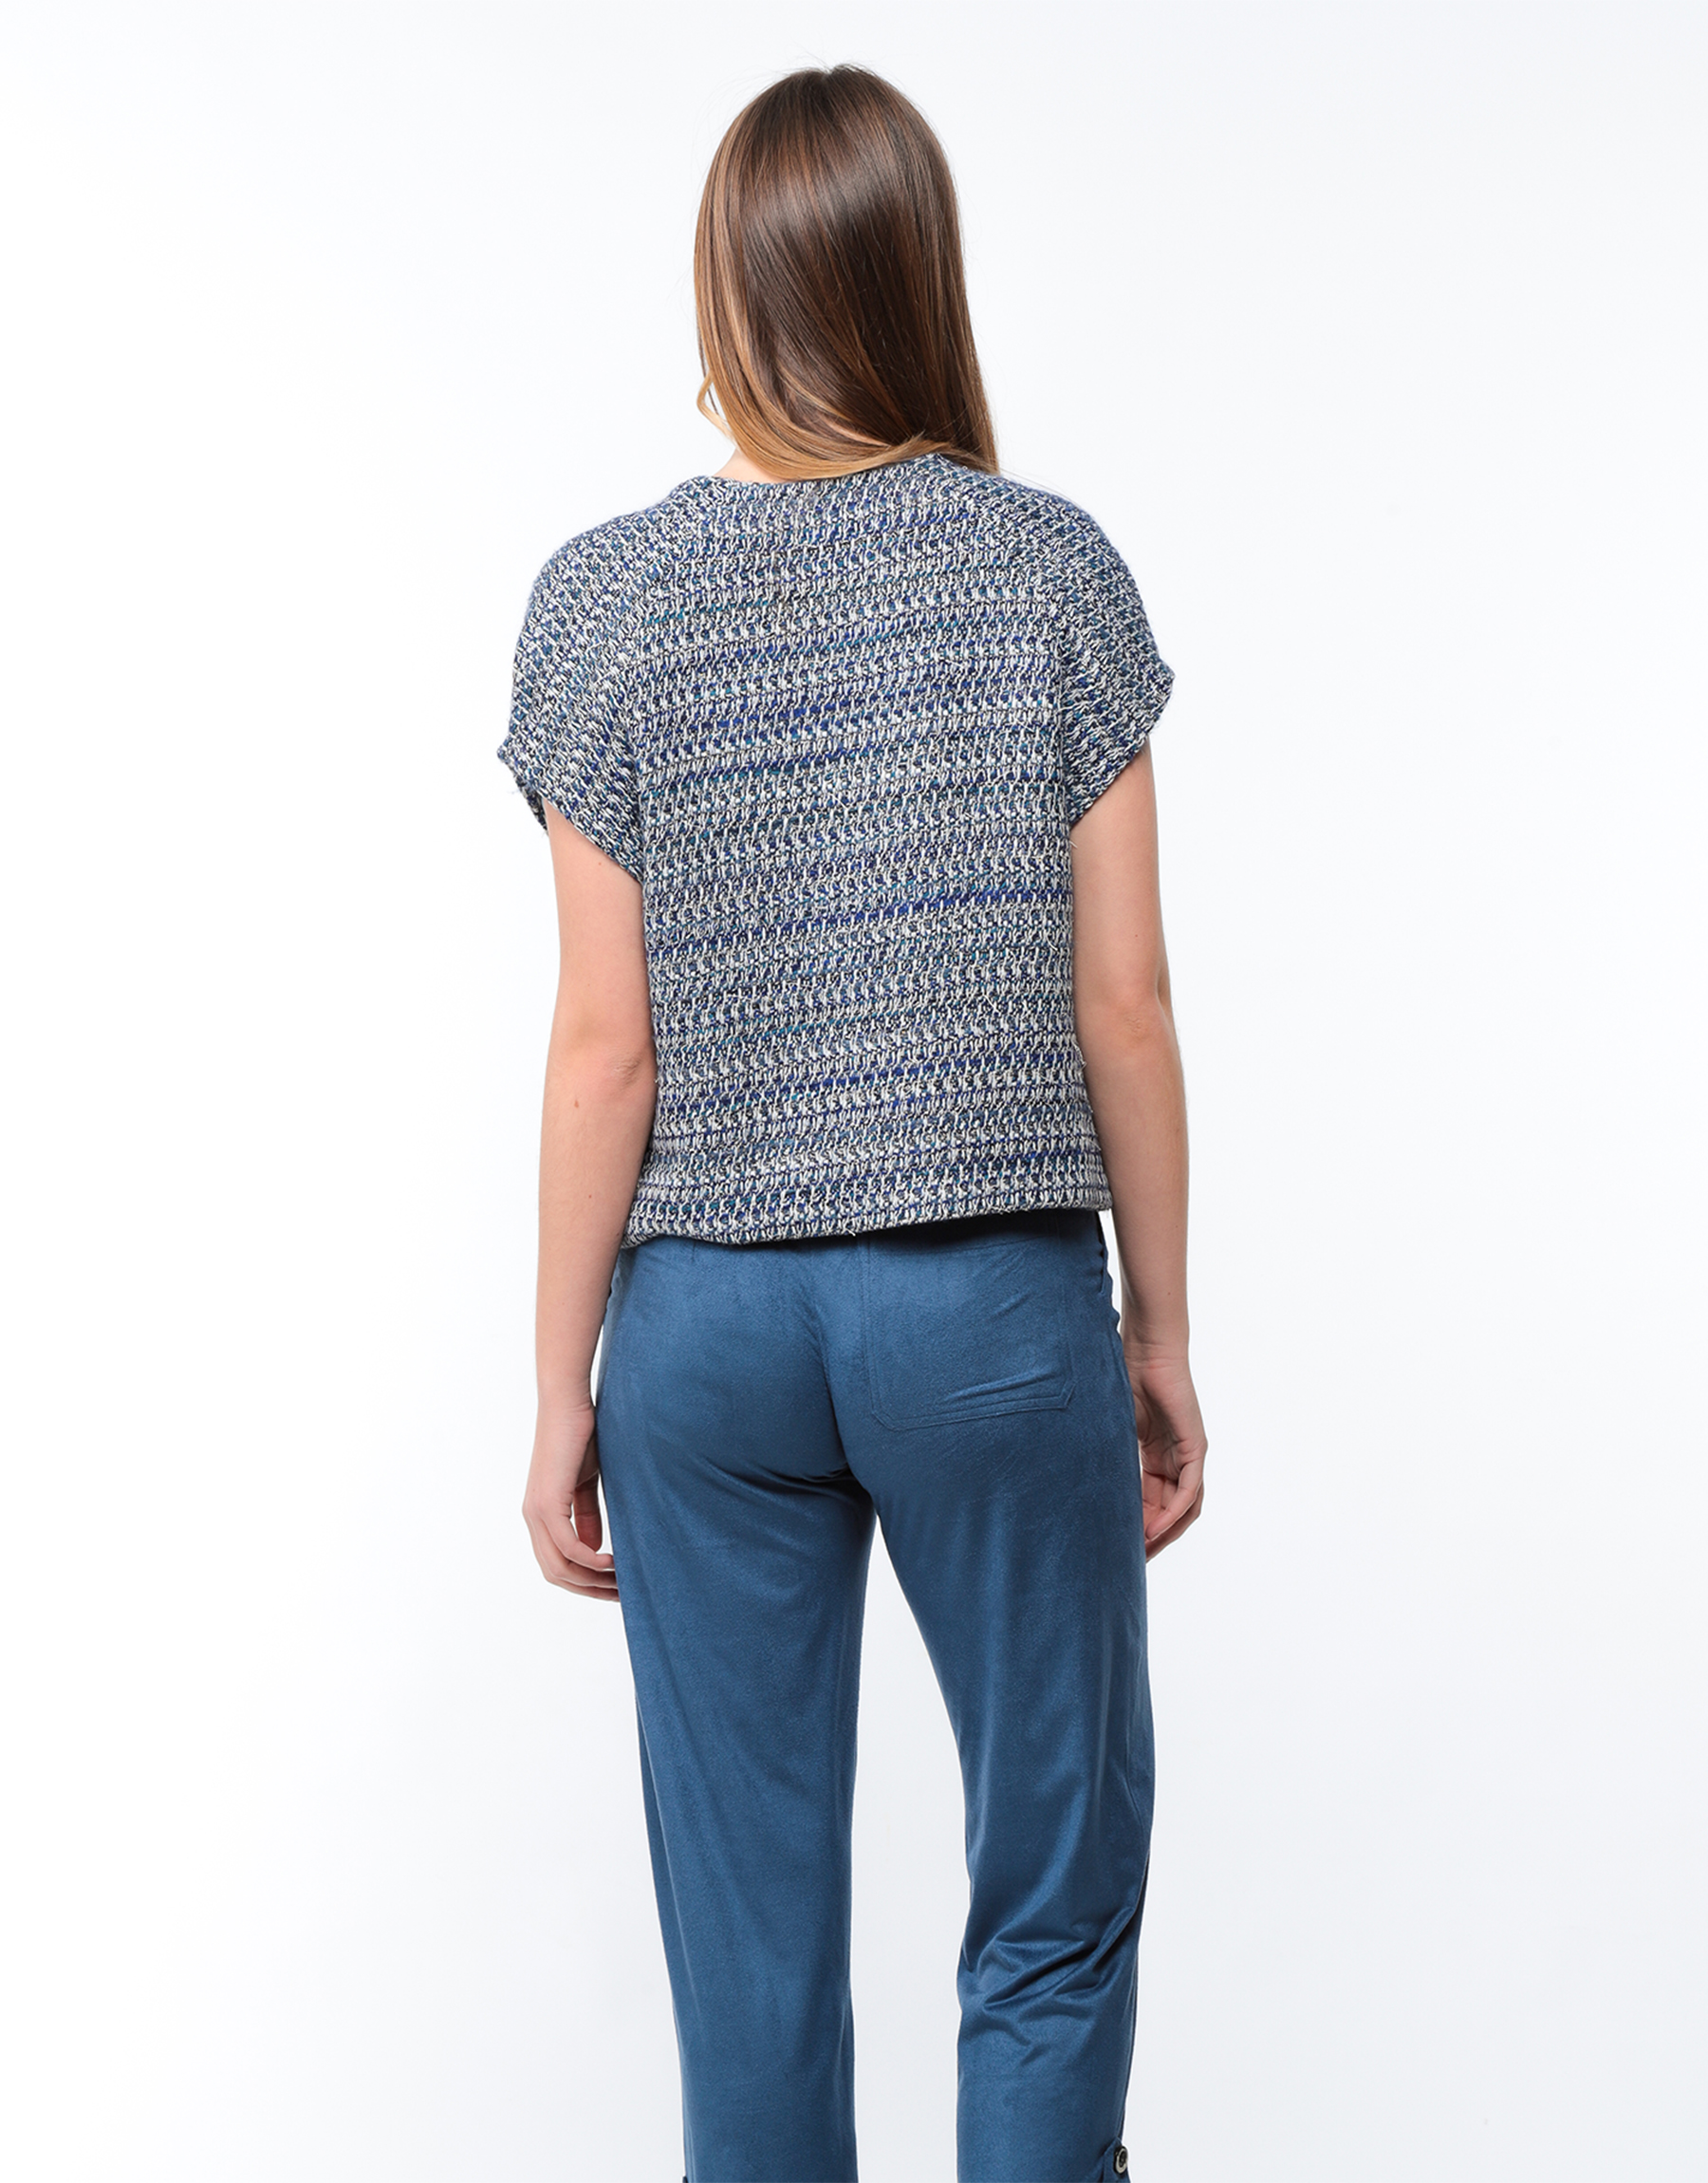 Short sleeve jacket in blue and white tweed 